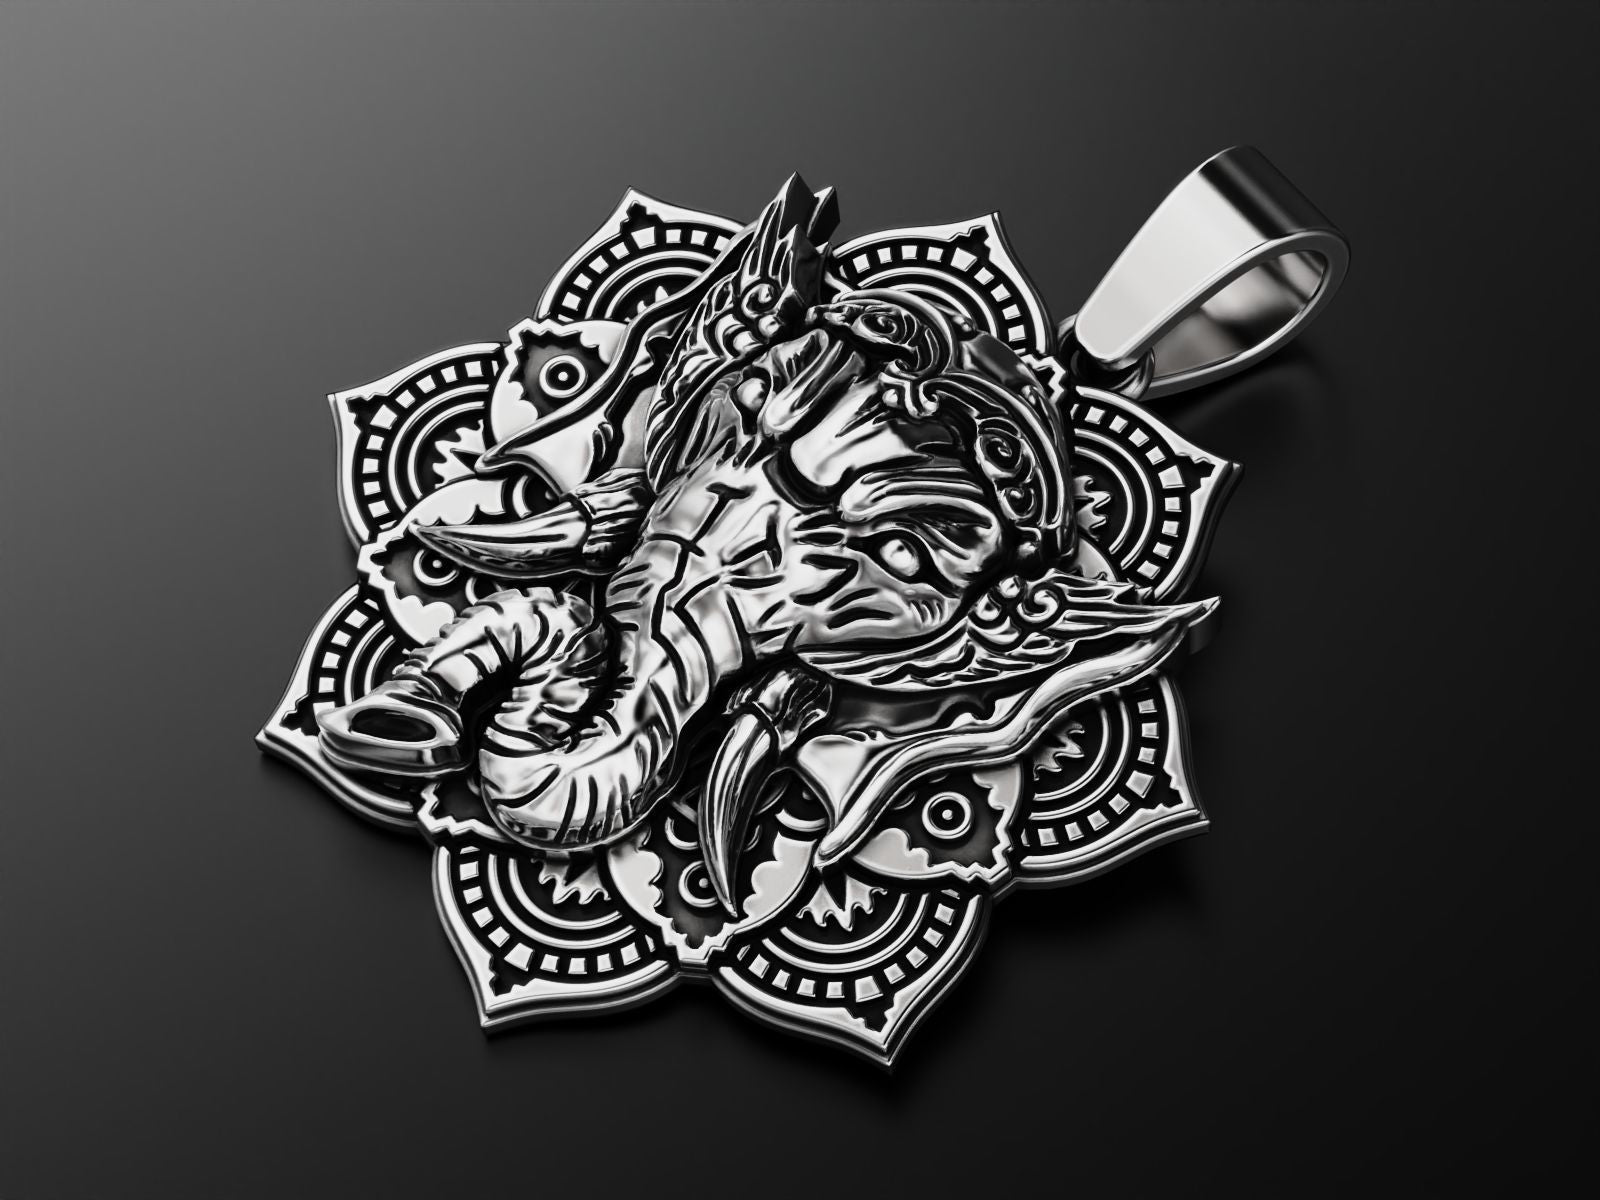 RARE PRINCE by CARAT SUTRA | Unique Designed Ganesha Pendant | 925 Sterling Silver Oxidized Pendant | Men's Jewelry | With Certificate of Authenticity and 925 Hallmark - caratsutra